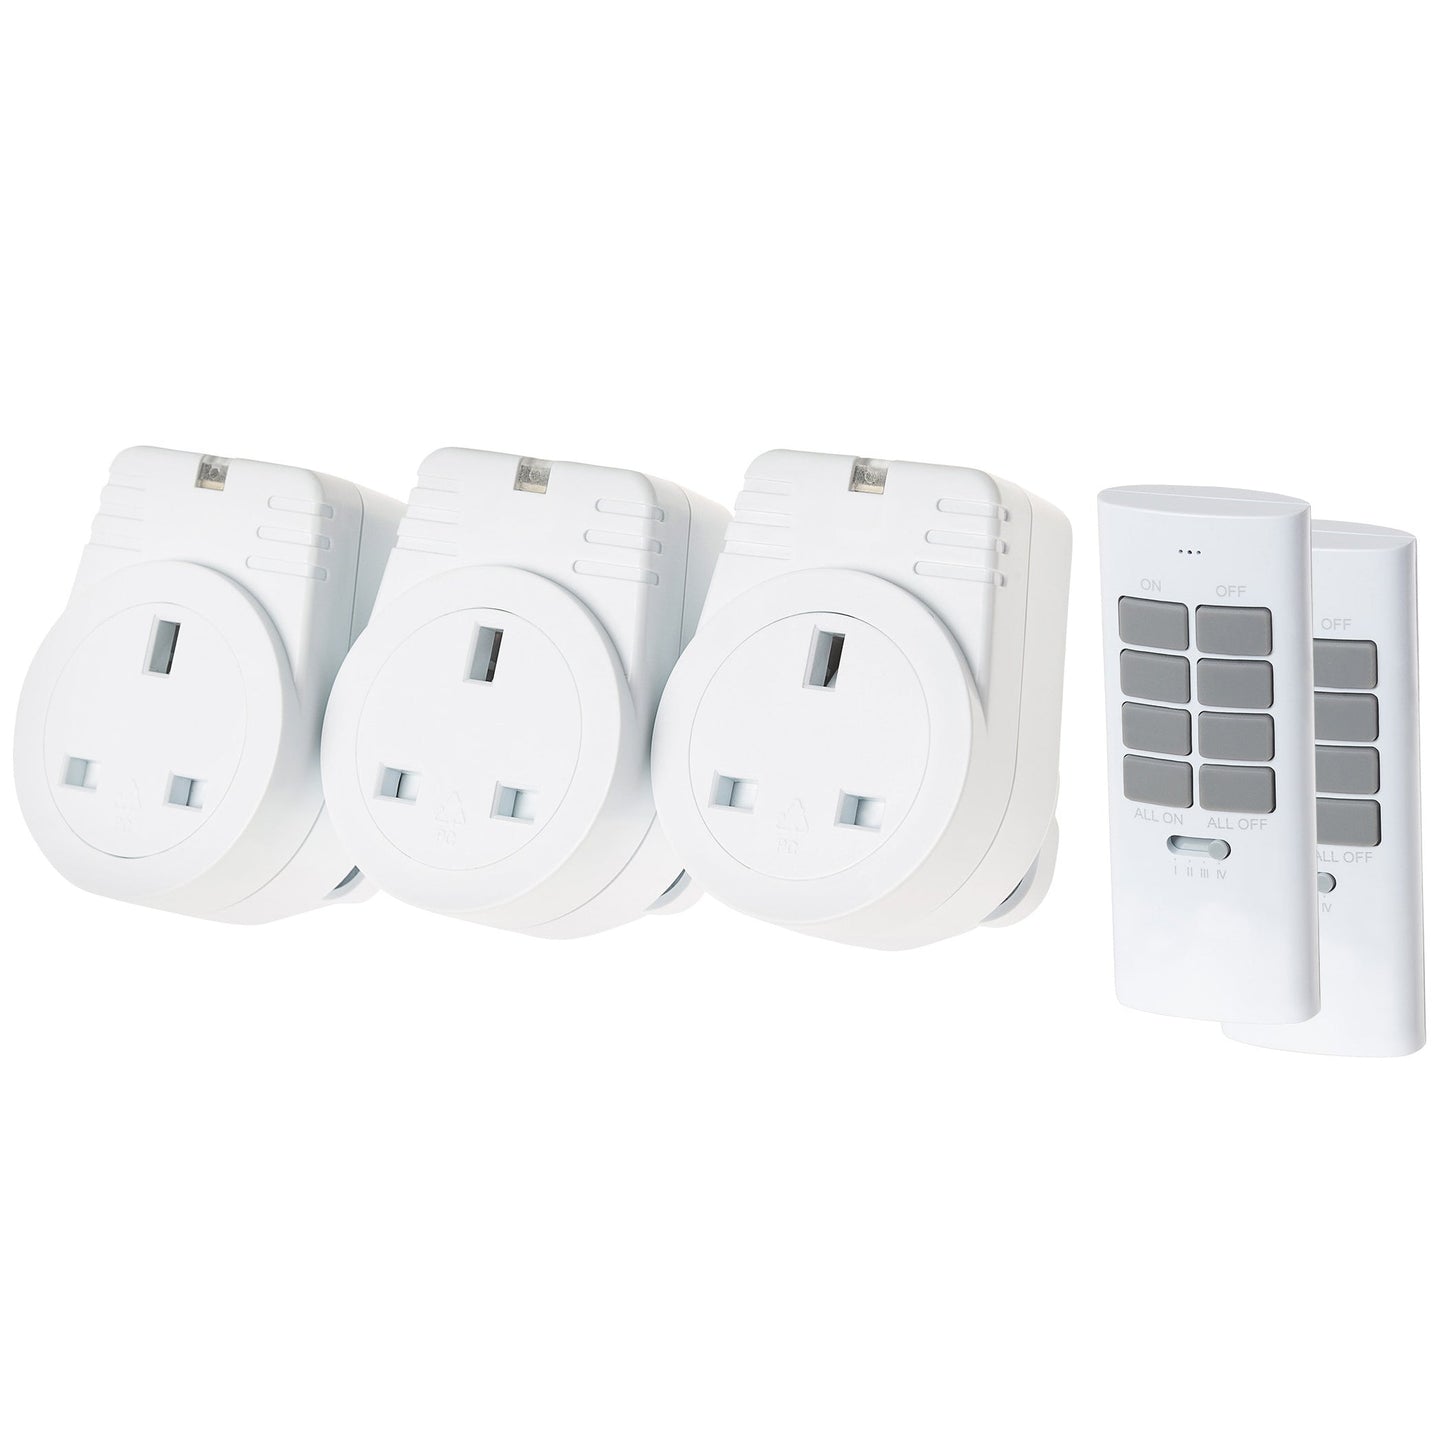 Maplin ORB RF V2 Remote Controlled Mains Plug Socket - Pack of 3 with 2 Remotes - maplin.co.uk